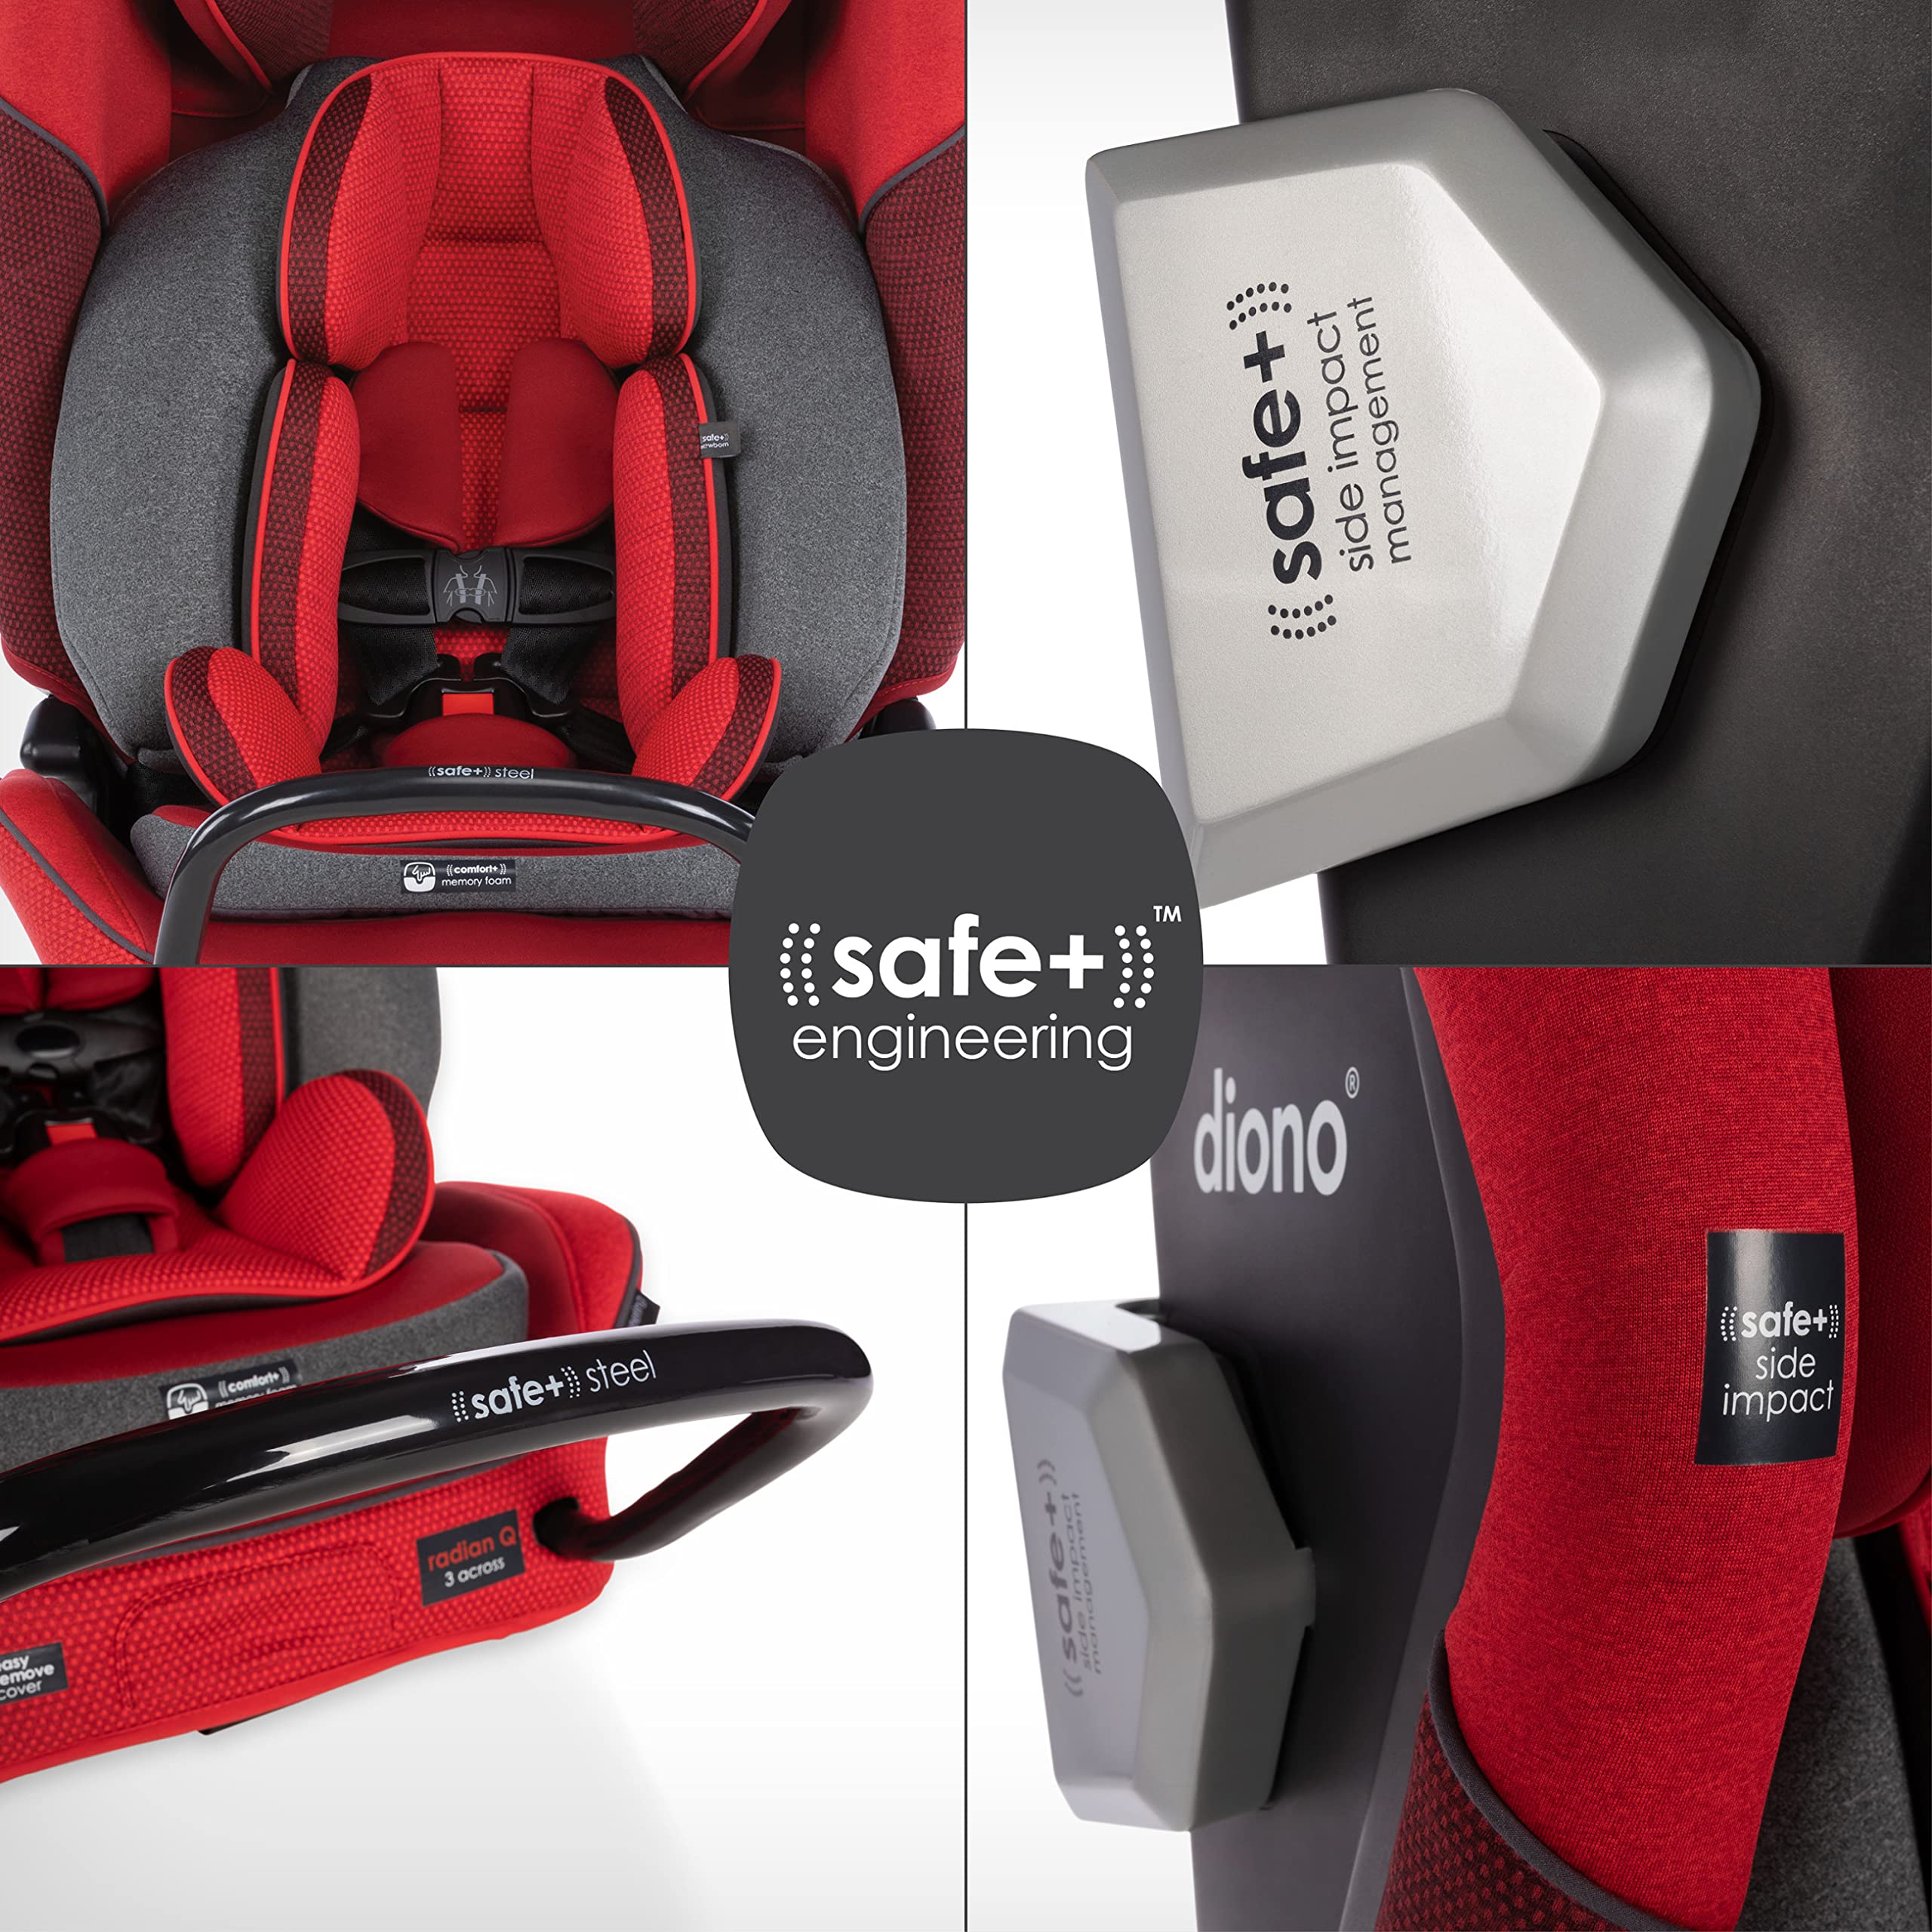 Diono Radian 3QXT 4-in-1 Rear and Forward Facing Convertible Car Seat, Safe Plus Engineering, 4 Stage Infant Protection, 10 Years 1 Car Seat, Slim Fit 3 Across, Red Cherry